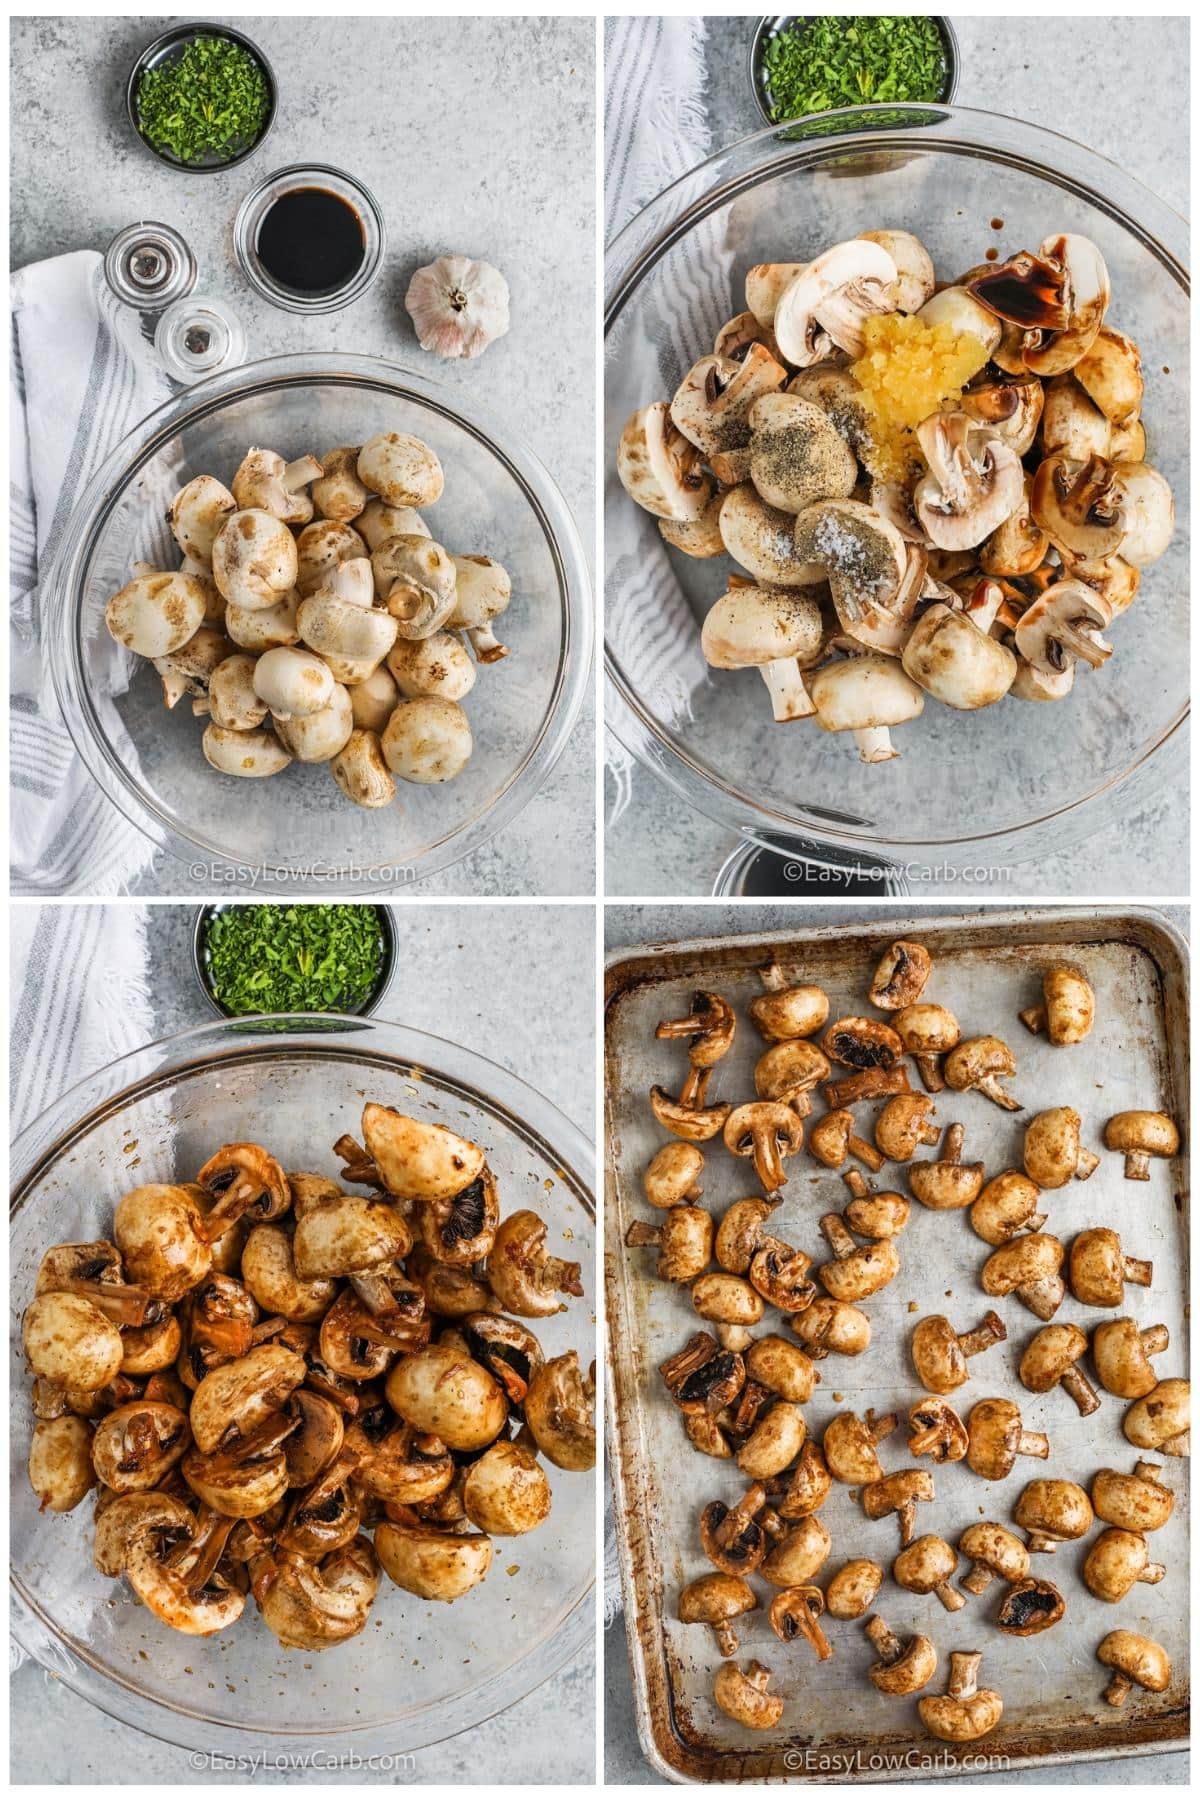 process of adding ingredients together to make Oven Roasted Mushrooms